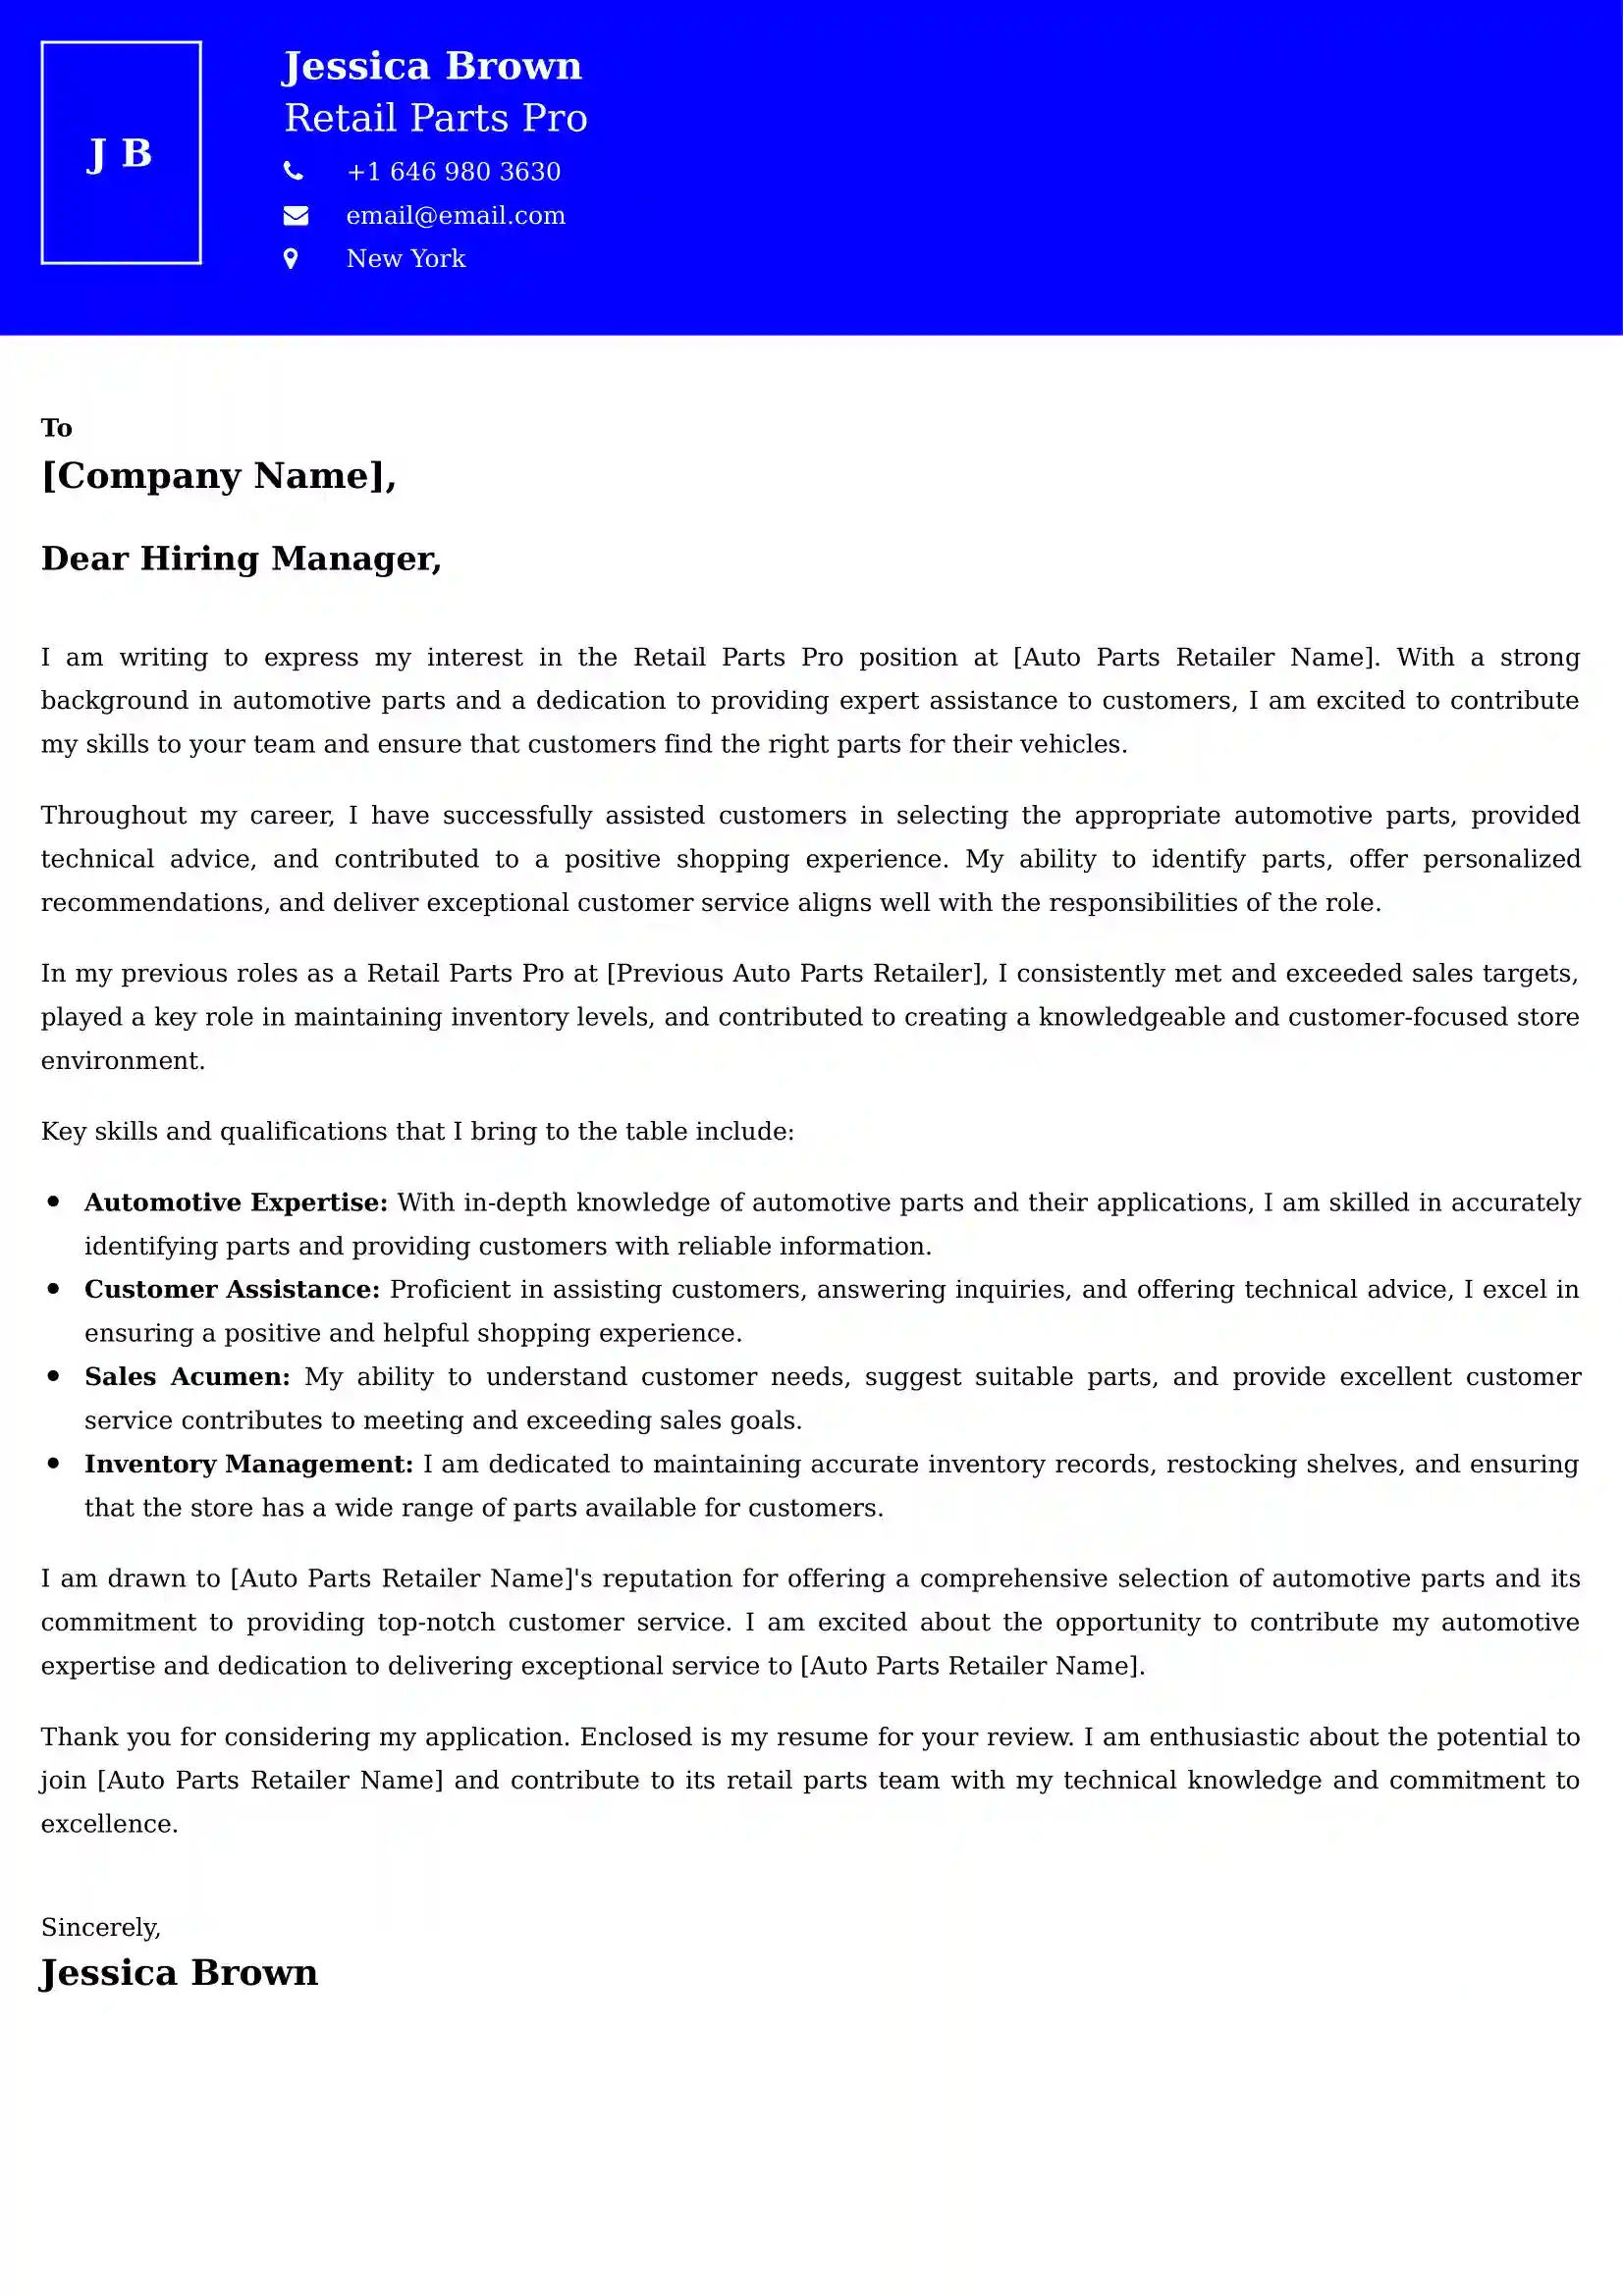 Retail Parts Pro Cover Letter Examples for UK 